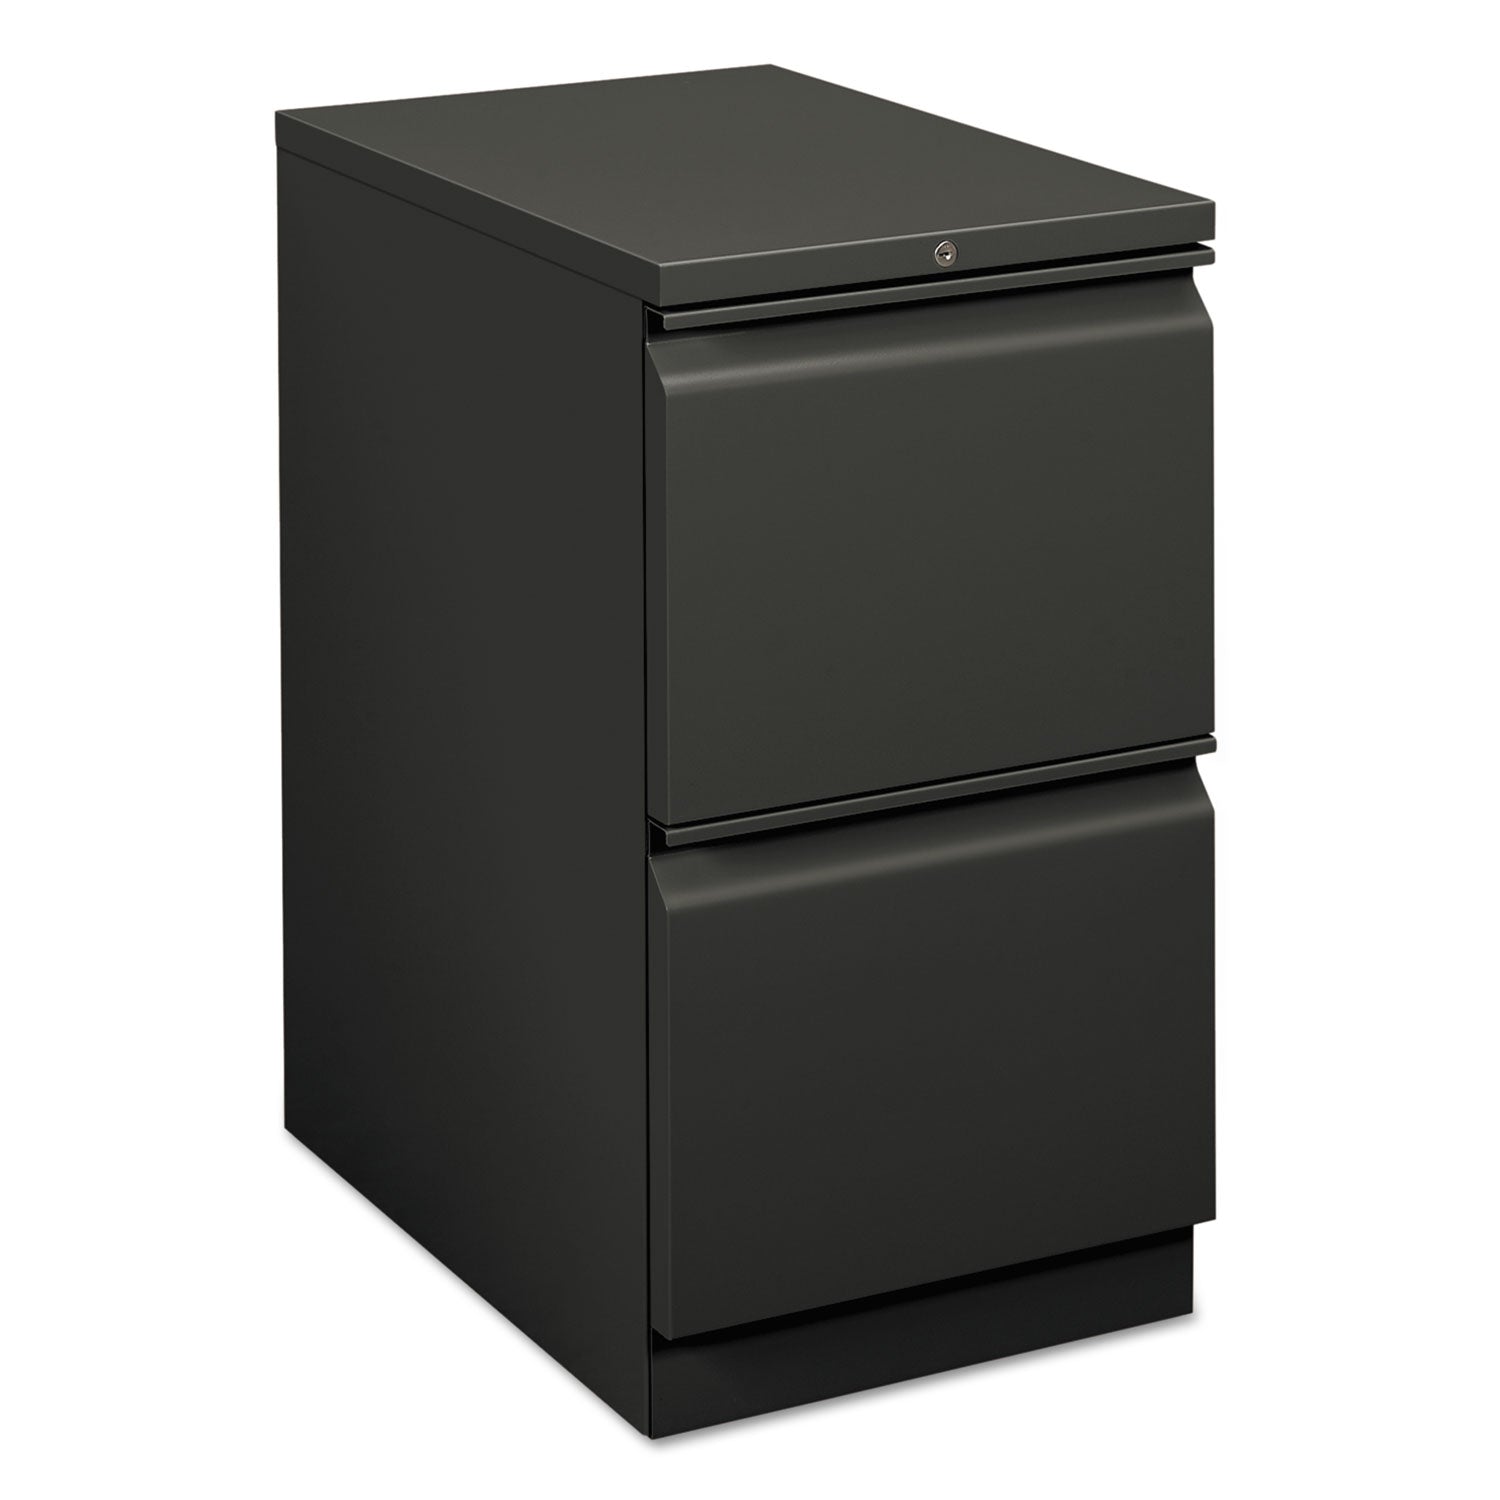 Brigade Mobile Pedestal, Left or Right, 2 Letter-Size File Drawers, Charcoal, 15" x 22.88" x 28 - 